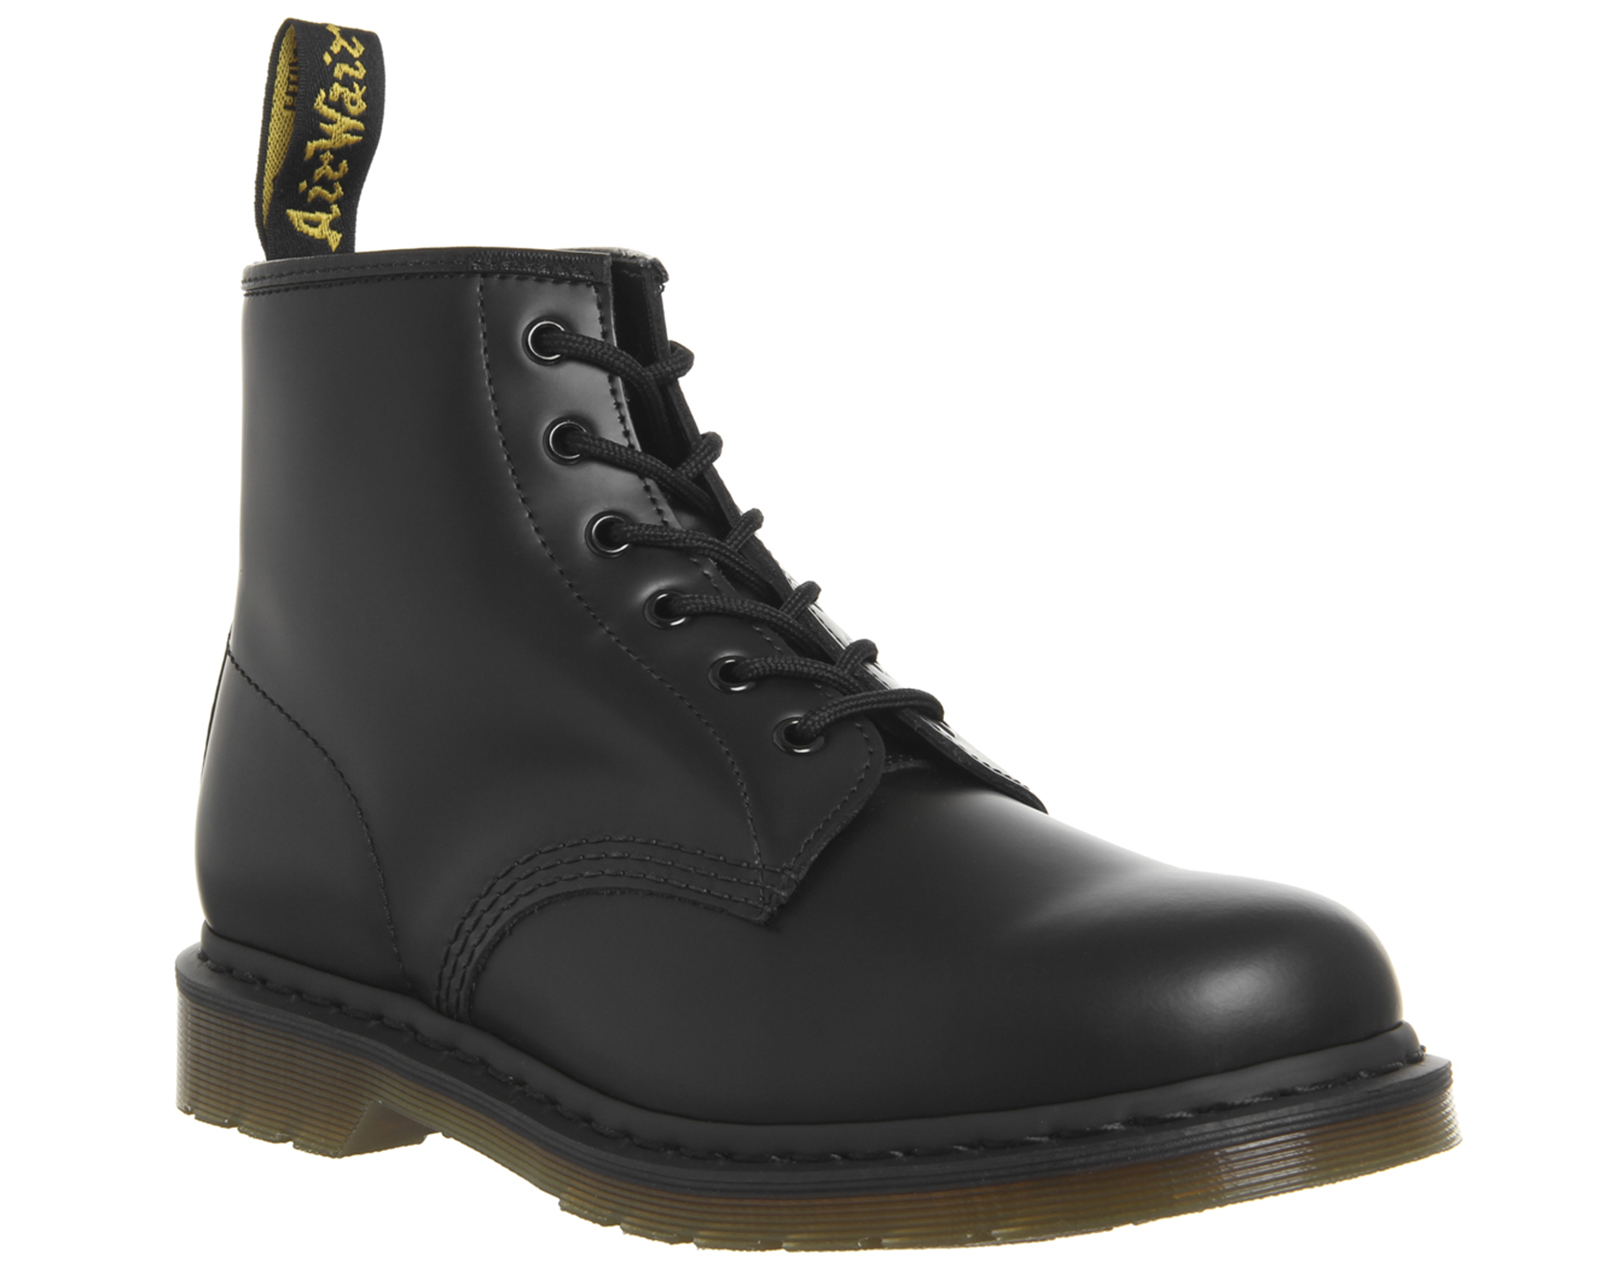 Dr. Martens 101 Boots Black Smooth - Boots